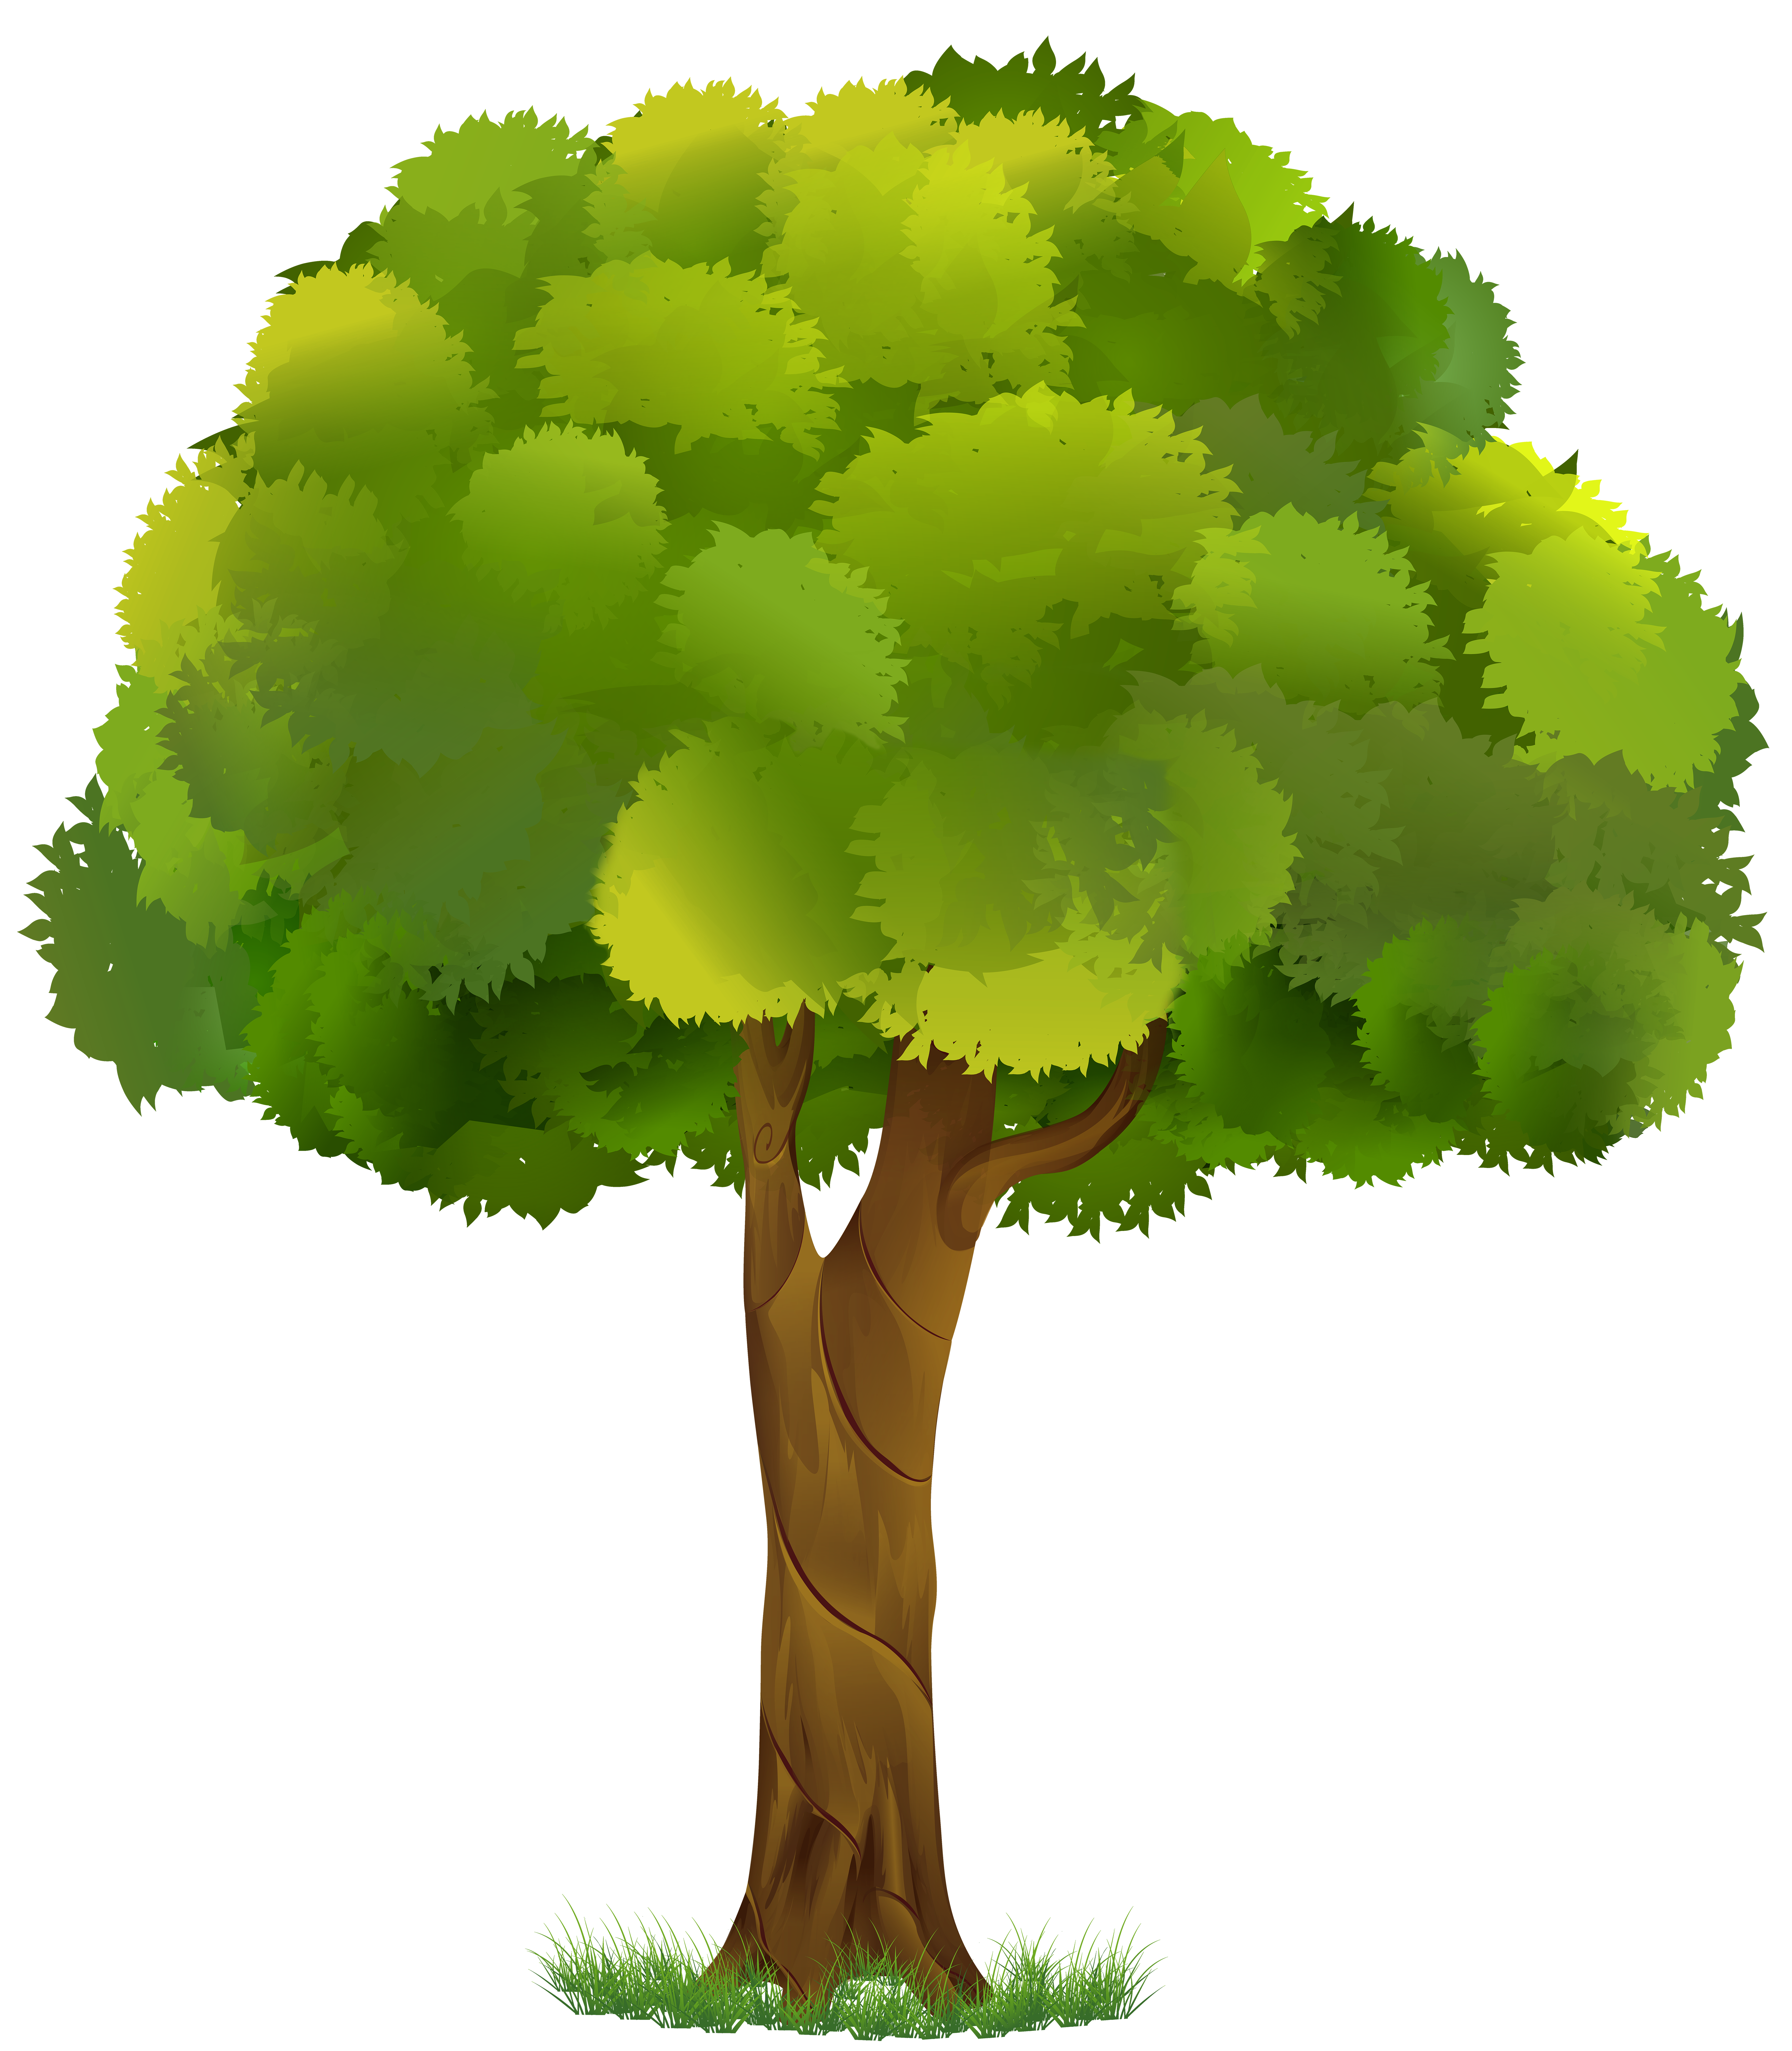 Free Cartoon Tree Transparent Background, Download Free Cartoon Tree  Transparent Background png images, Free ClipArts on Clipart Library